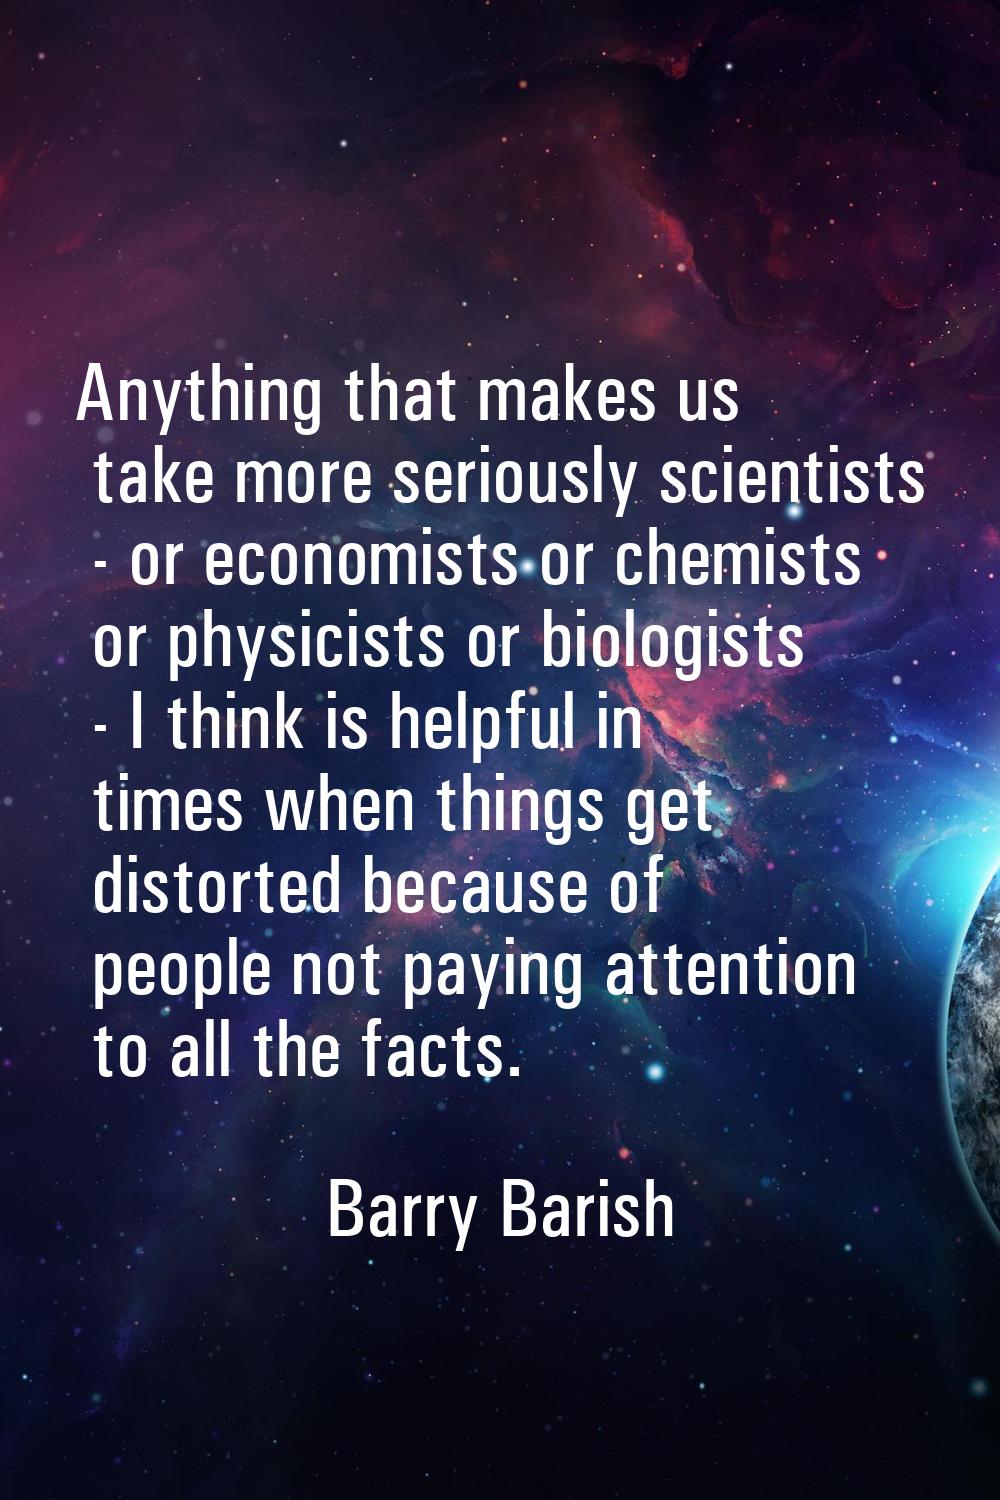 Anything that makes us take more seriously scientists - or economists or chemists or physicists or 